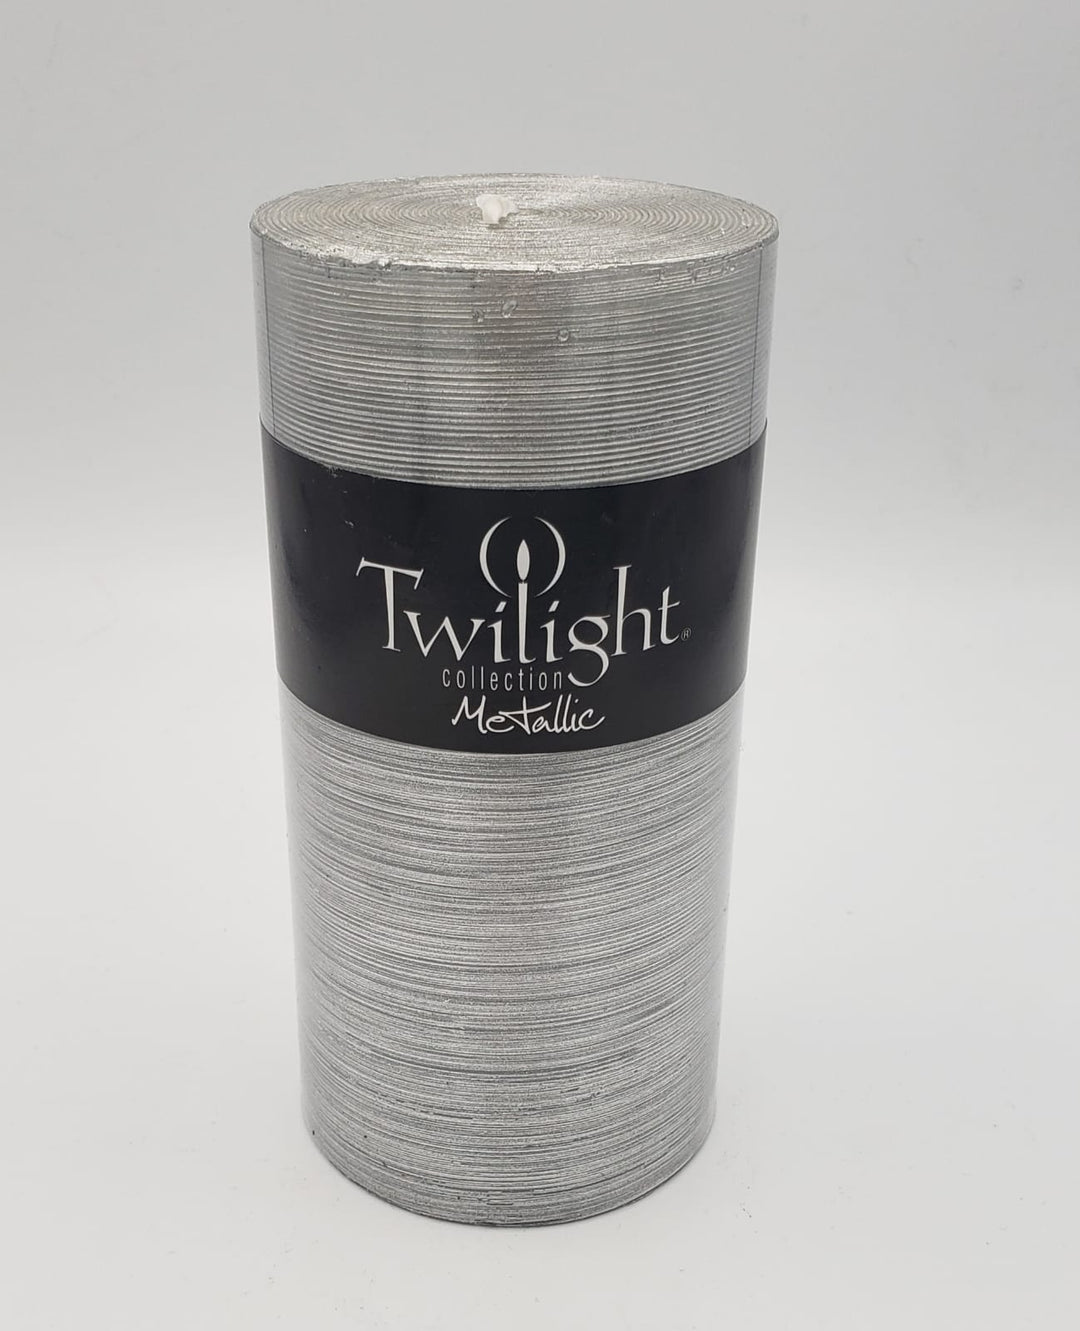 twilight 6" Candle - Buchan's Kerrisdale Stationery